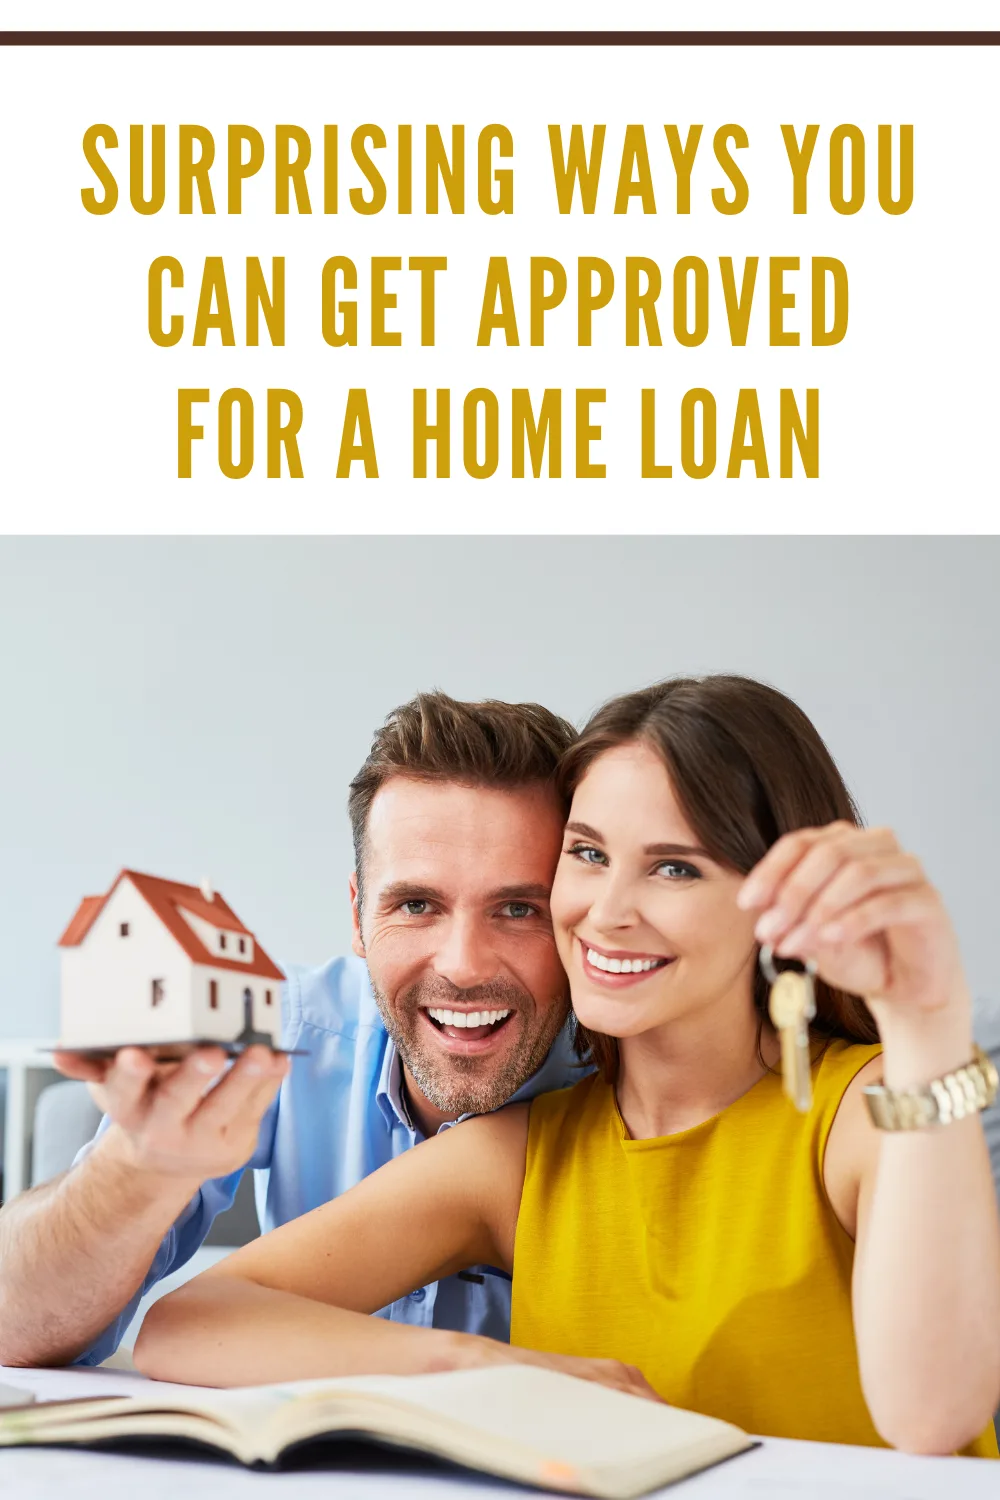 Happy couple holding keys to new home and house miniature - real estate concept